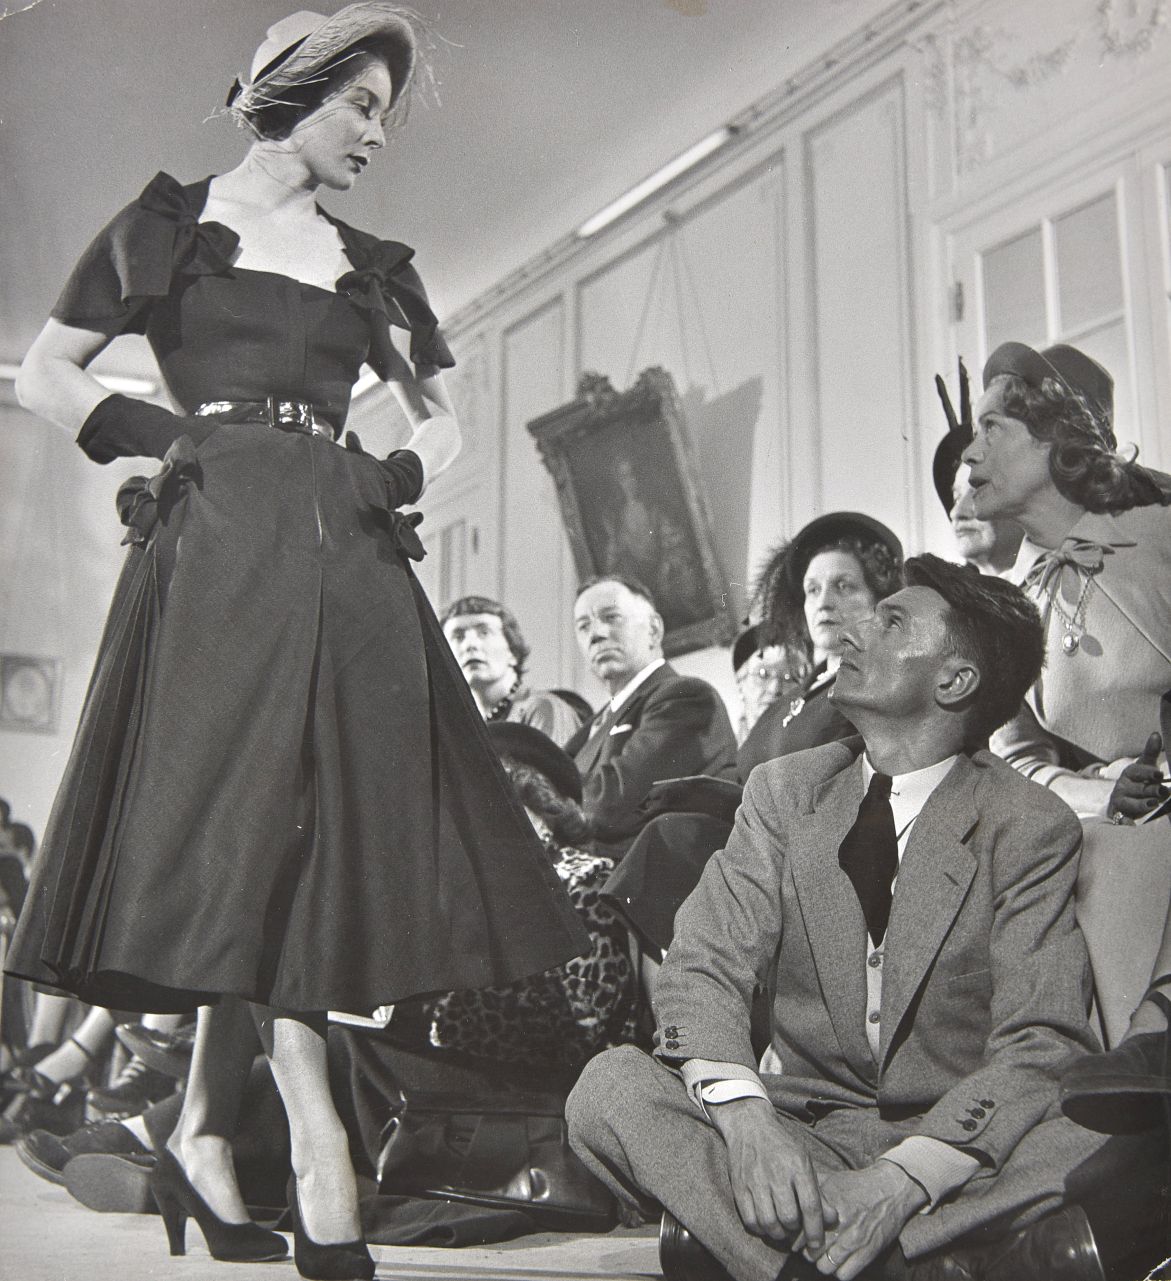 *Capa (Robert, 1913-1954). French fashion houses holding a Spring fashion show, 1948, printed